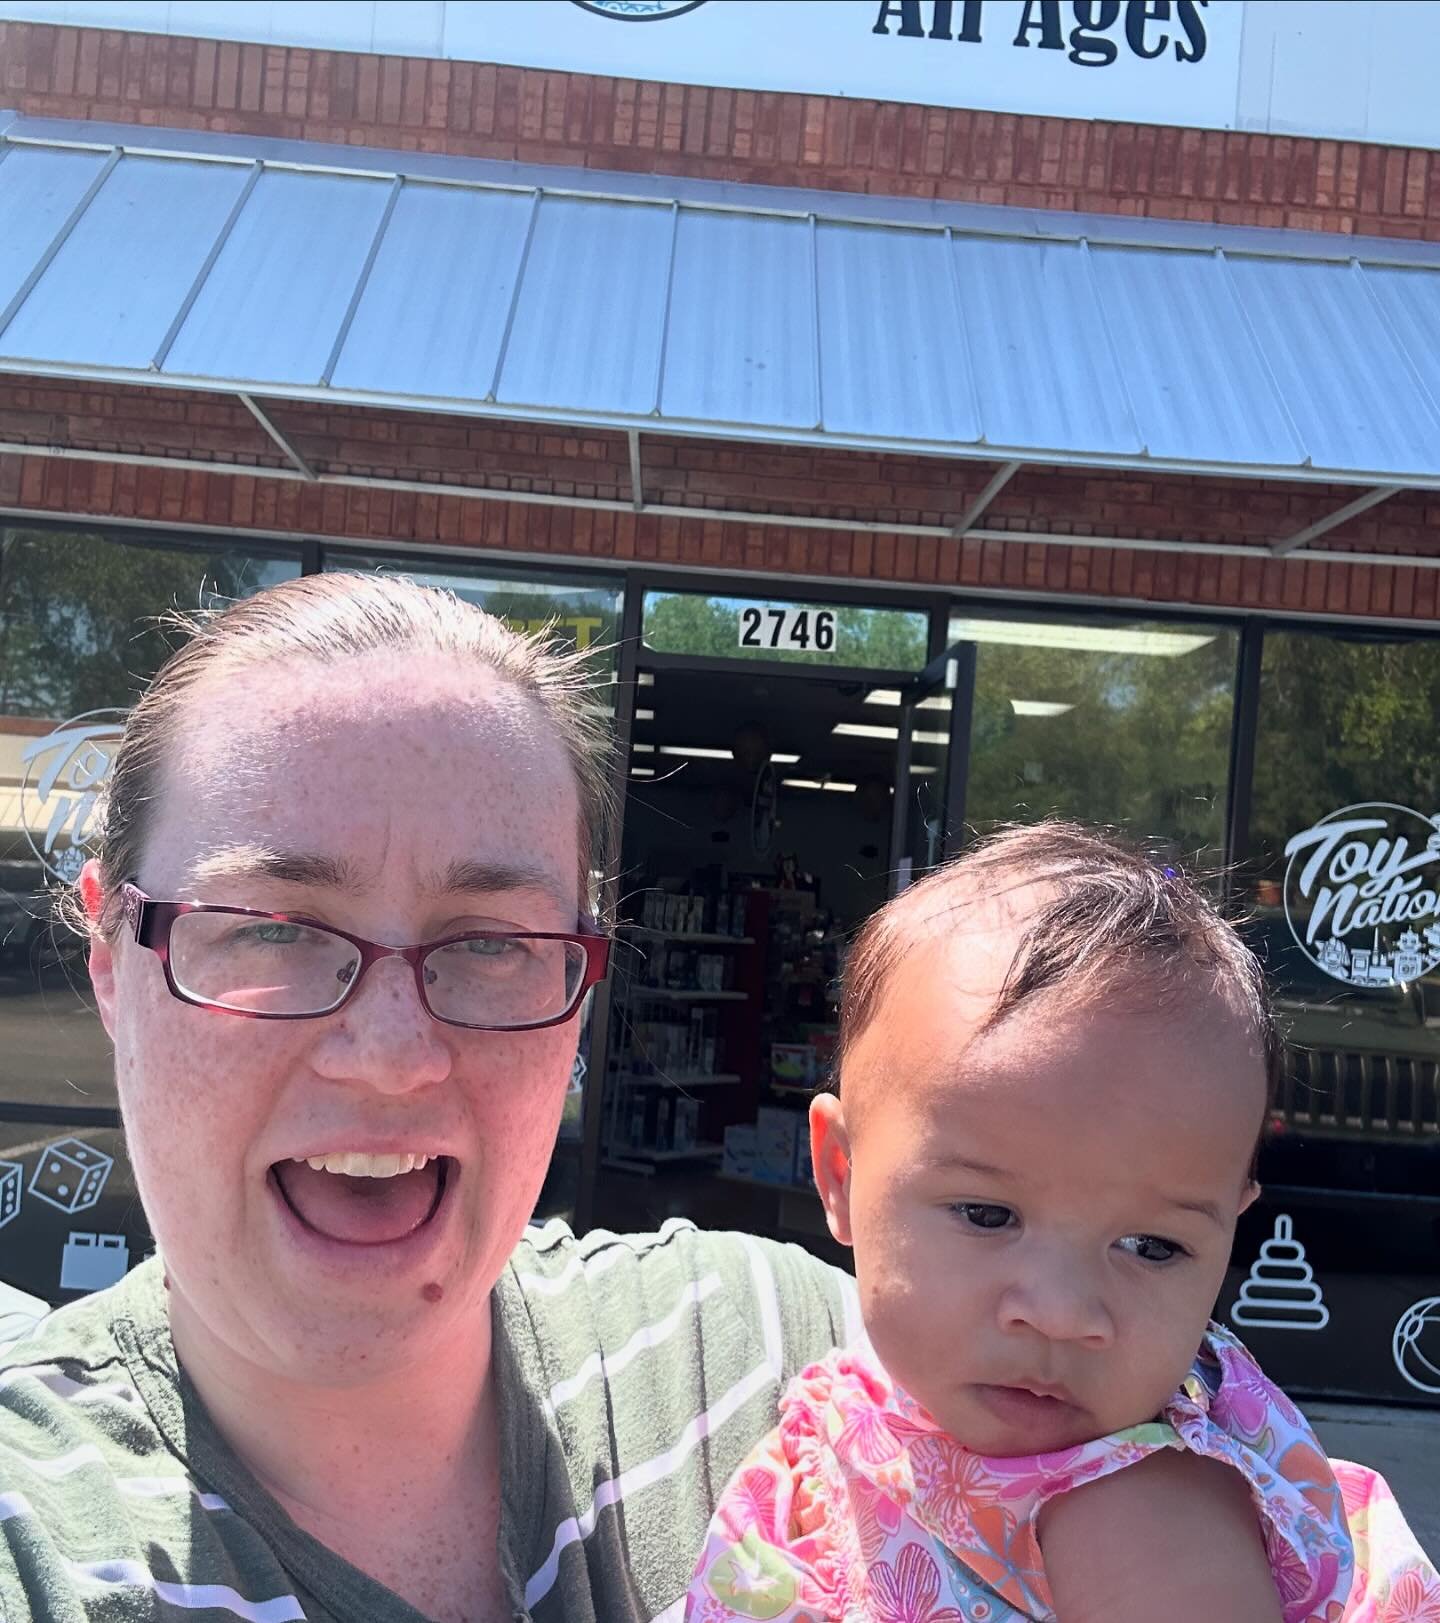 Anyone going to a birthday party this weekend? Stop by and see Ms. Debbie at @tallahassee.toy.nation for easy shopping! We went by last weekend for a friend turning one and easily found a great gift within minutes AND it was gift wrapped for free. No